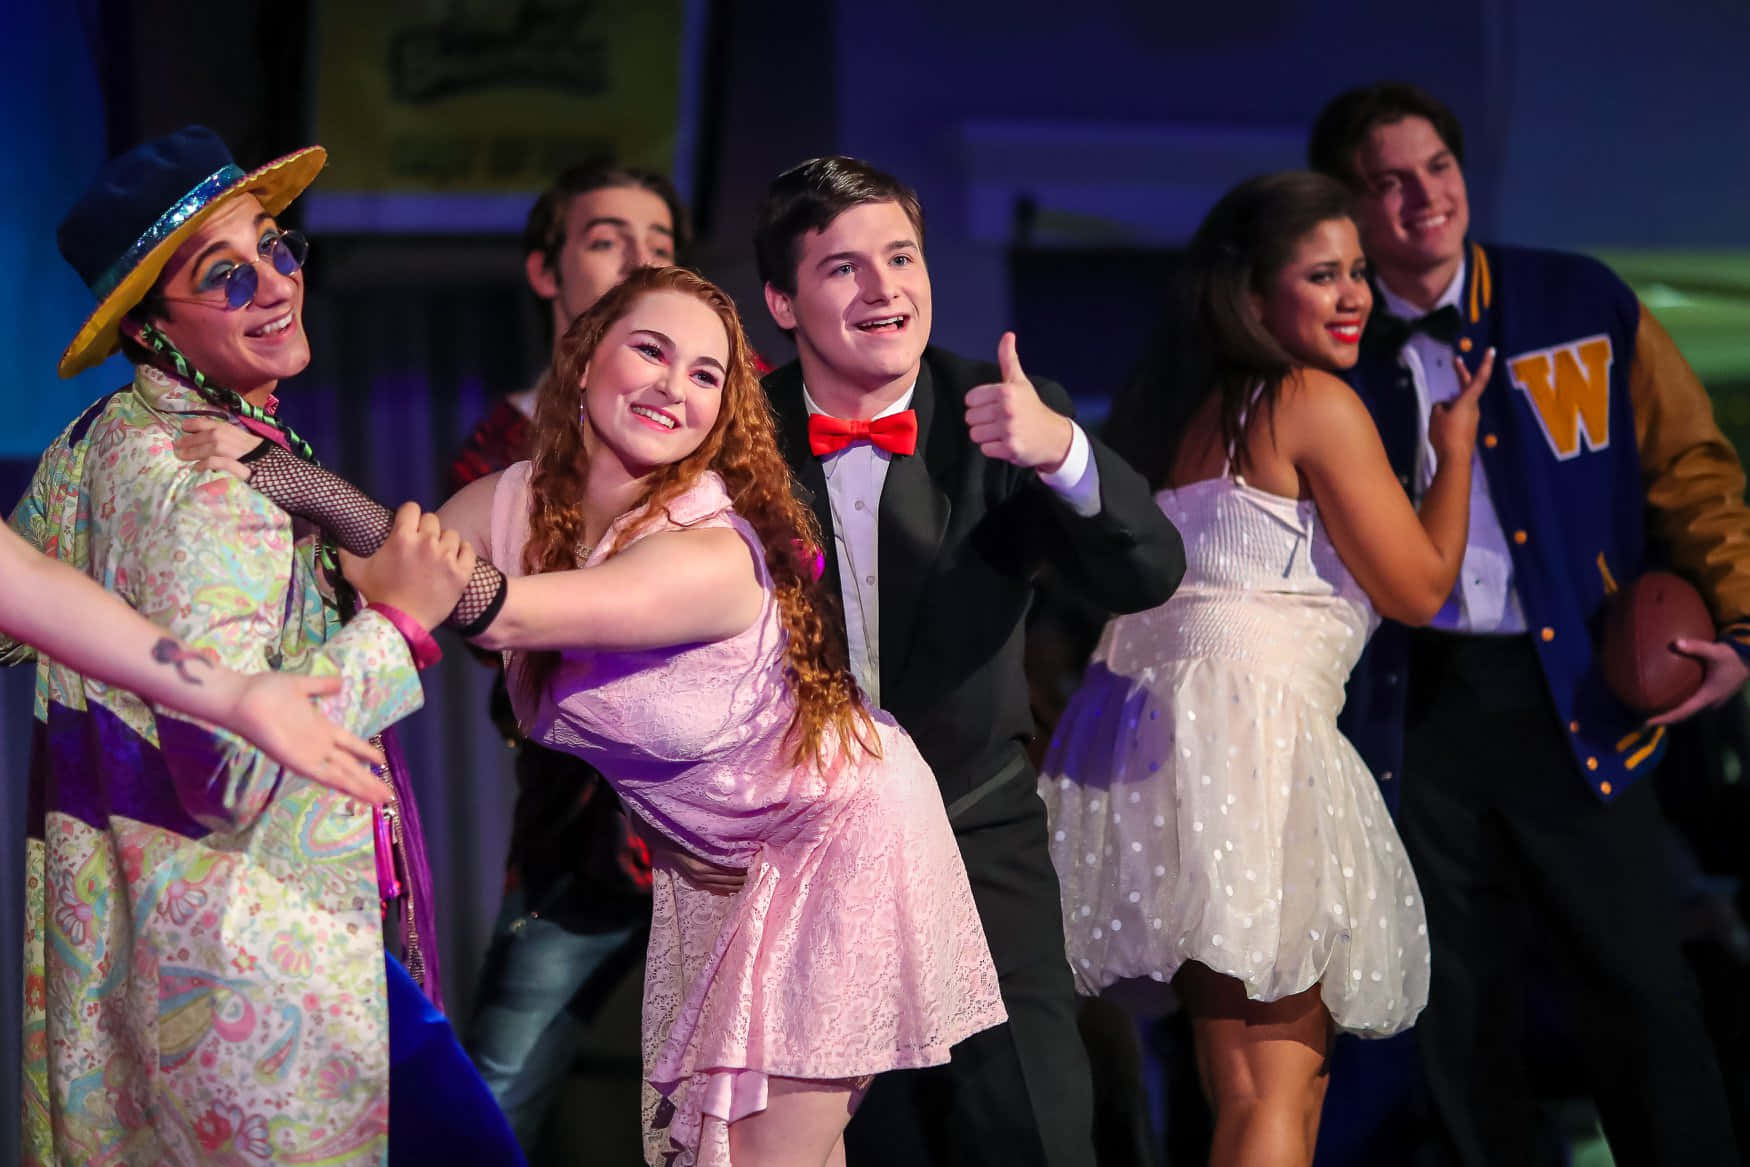 Step Back in Time to Experience the '80s Prom of Your Dreams